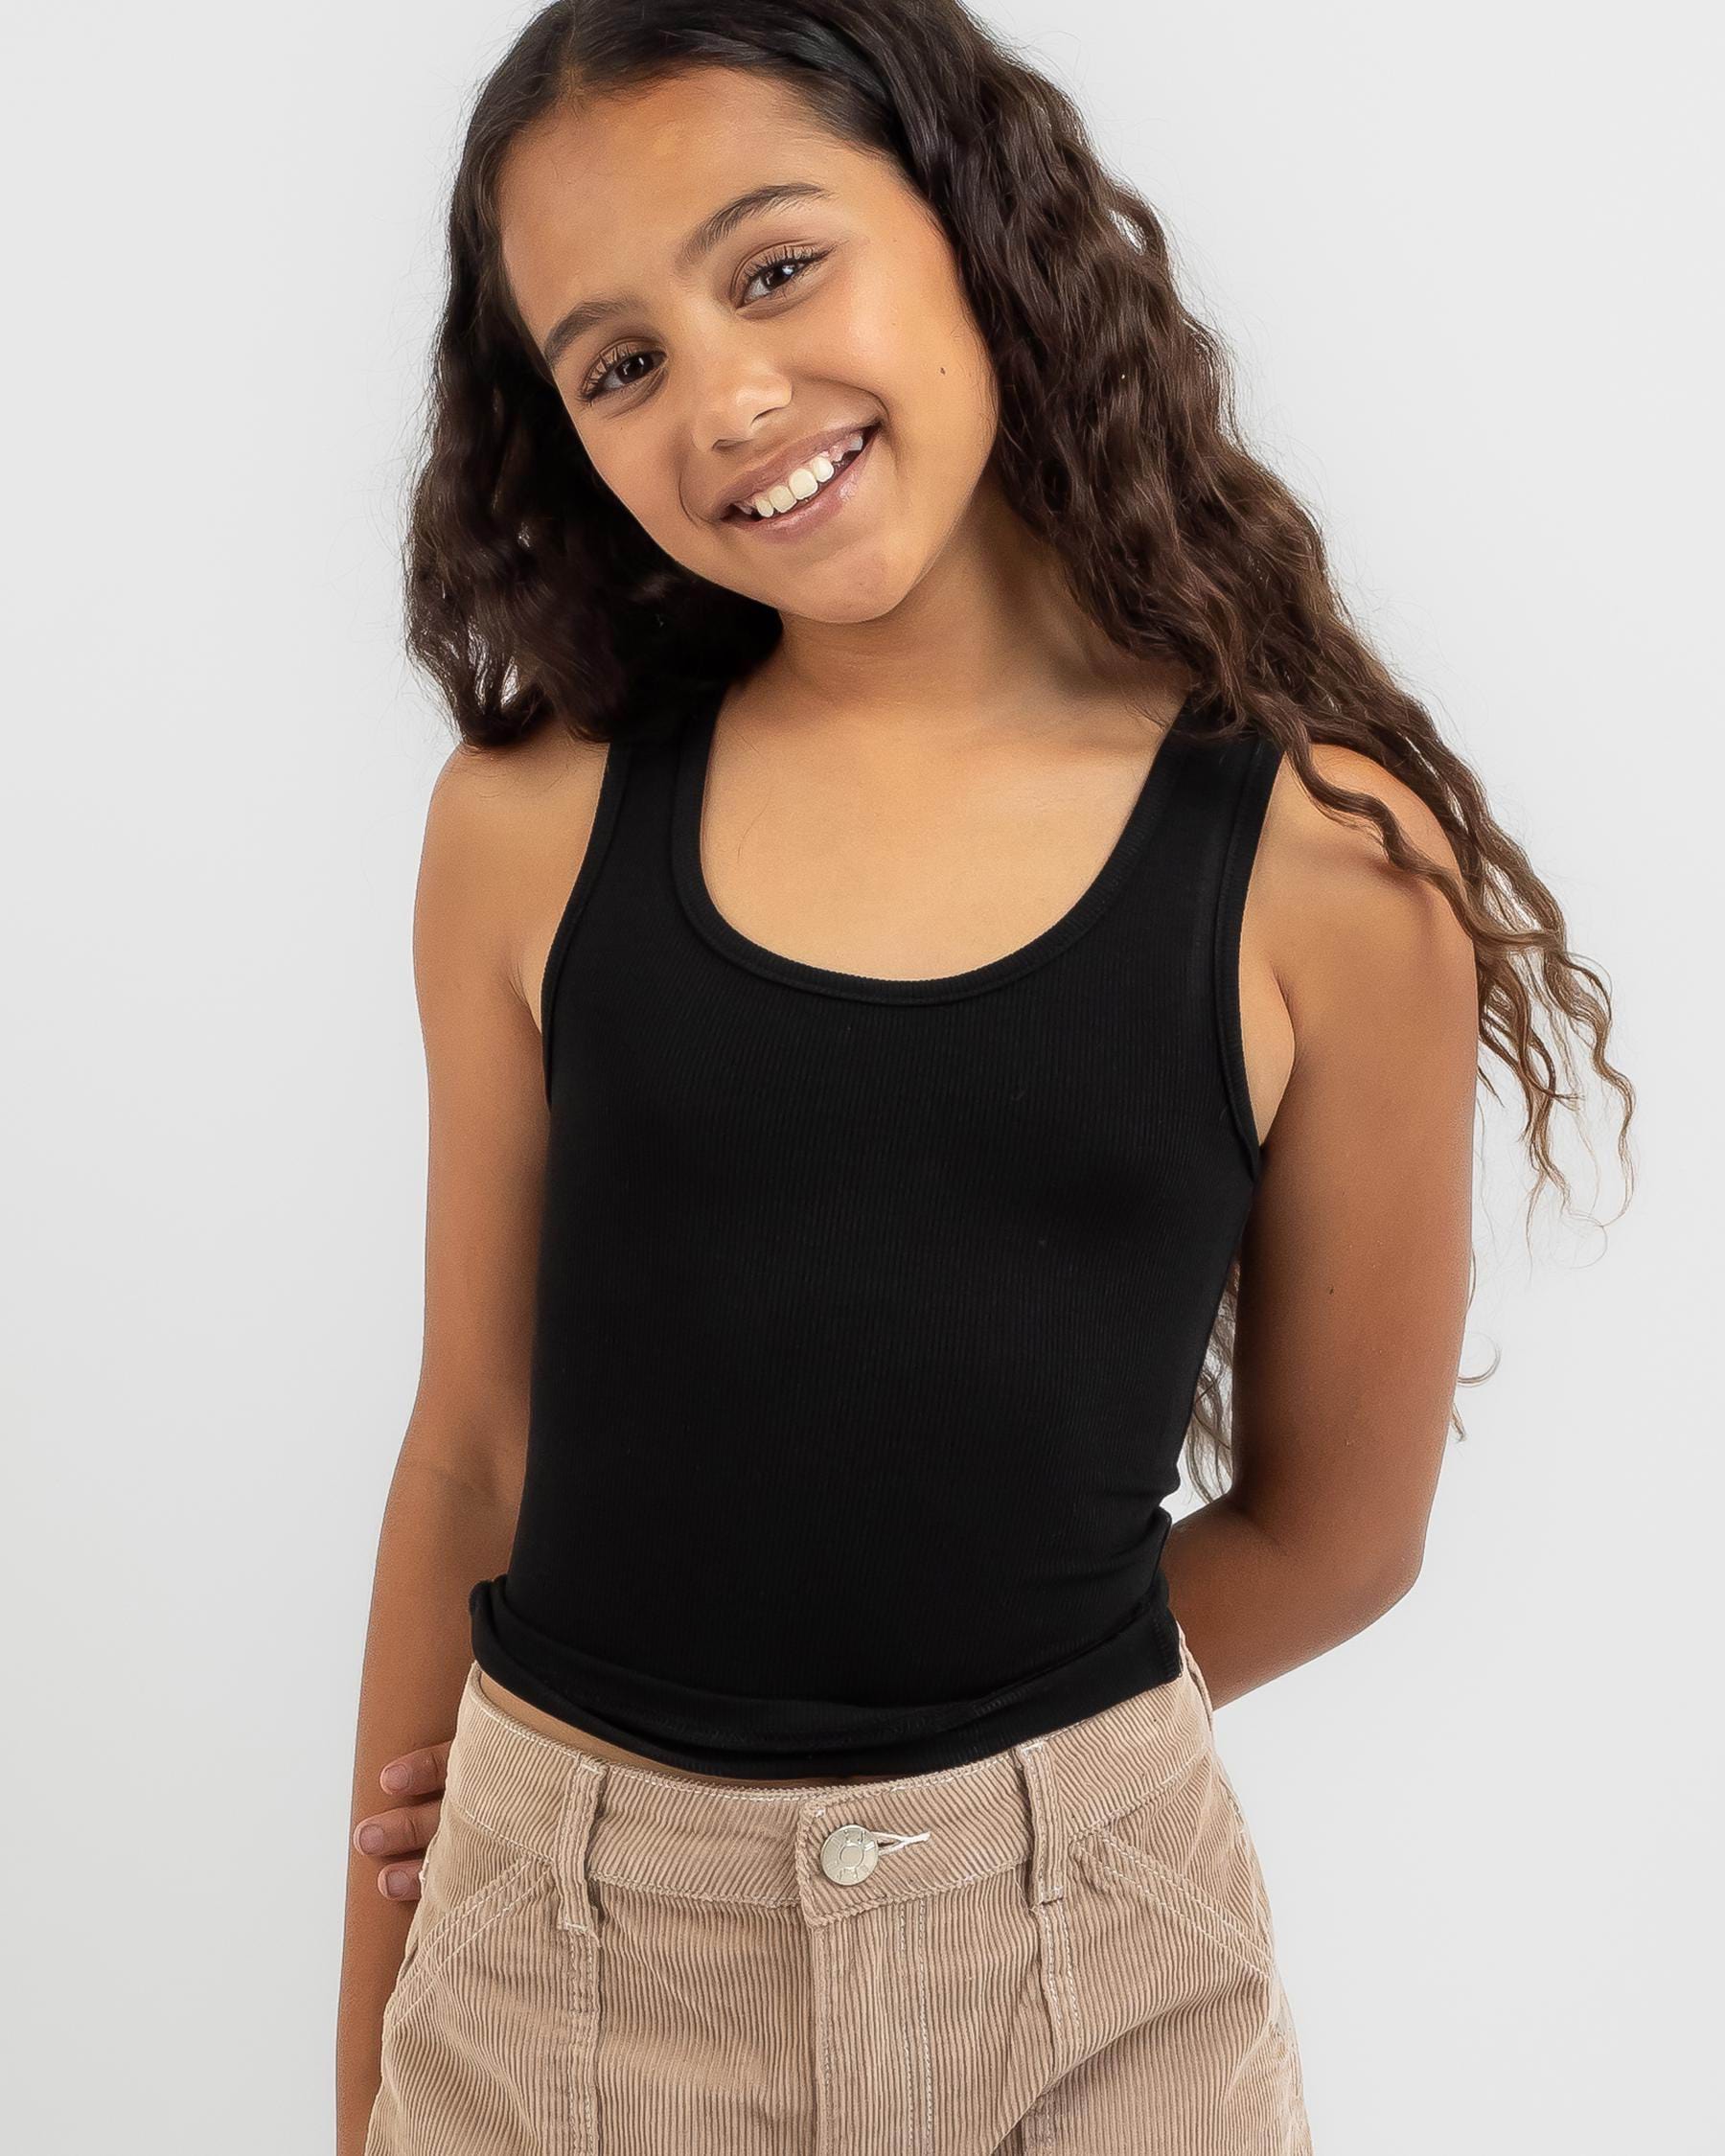 Mooloola Girls' Basic Scoop Neck Tank Top In Black - Fast Shipping ...